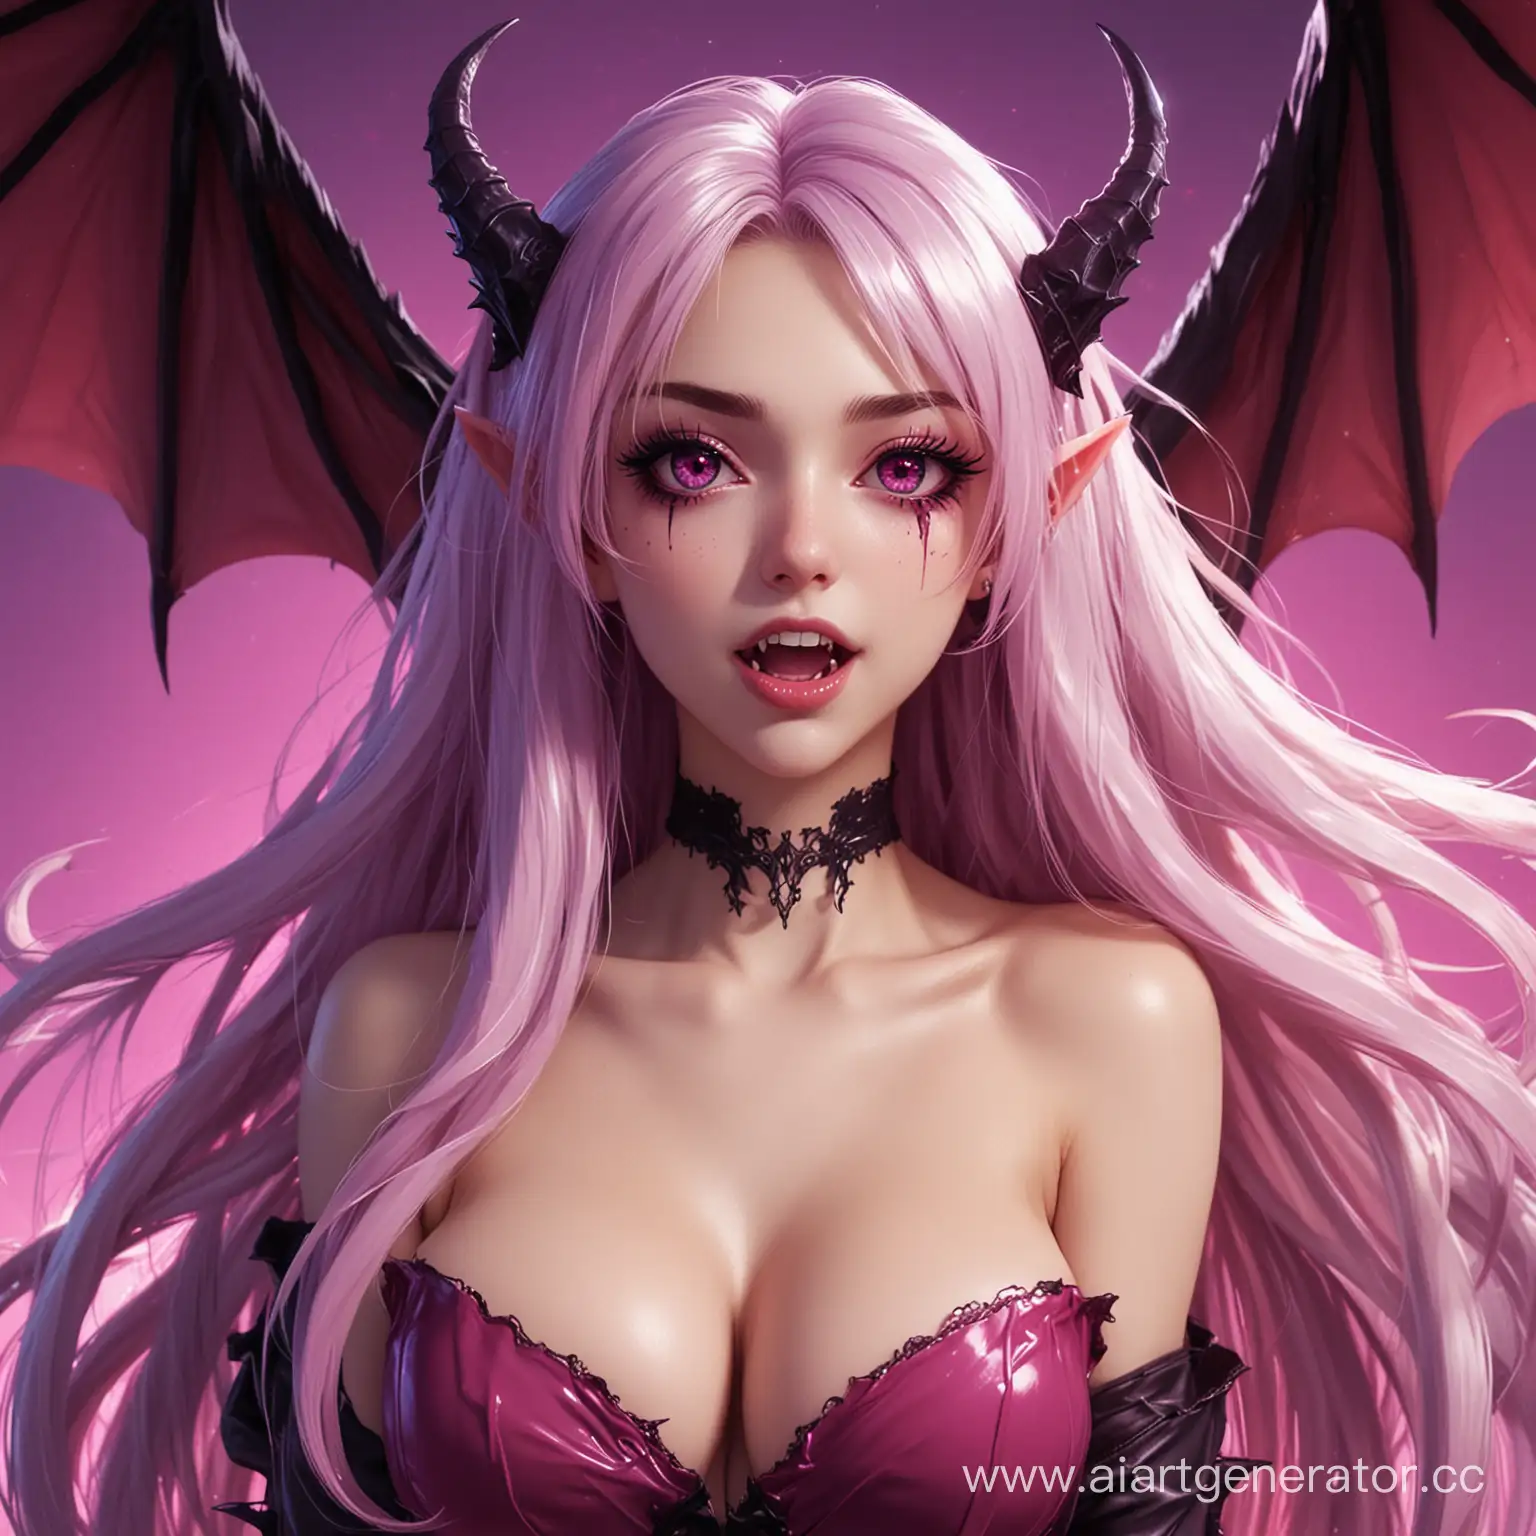 Beautiful-Anime-Succubus-with-Long-Pink-Hair-in-a-Purple-Fantasy-Setting